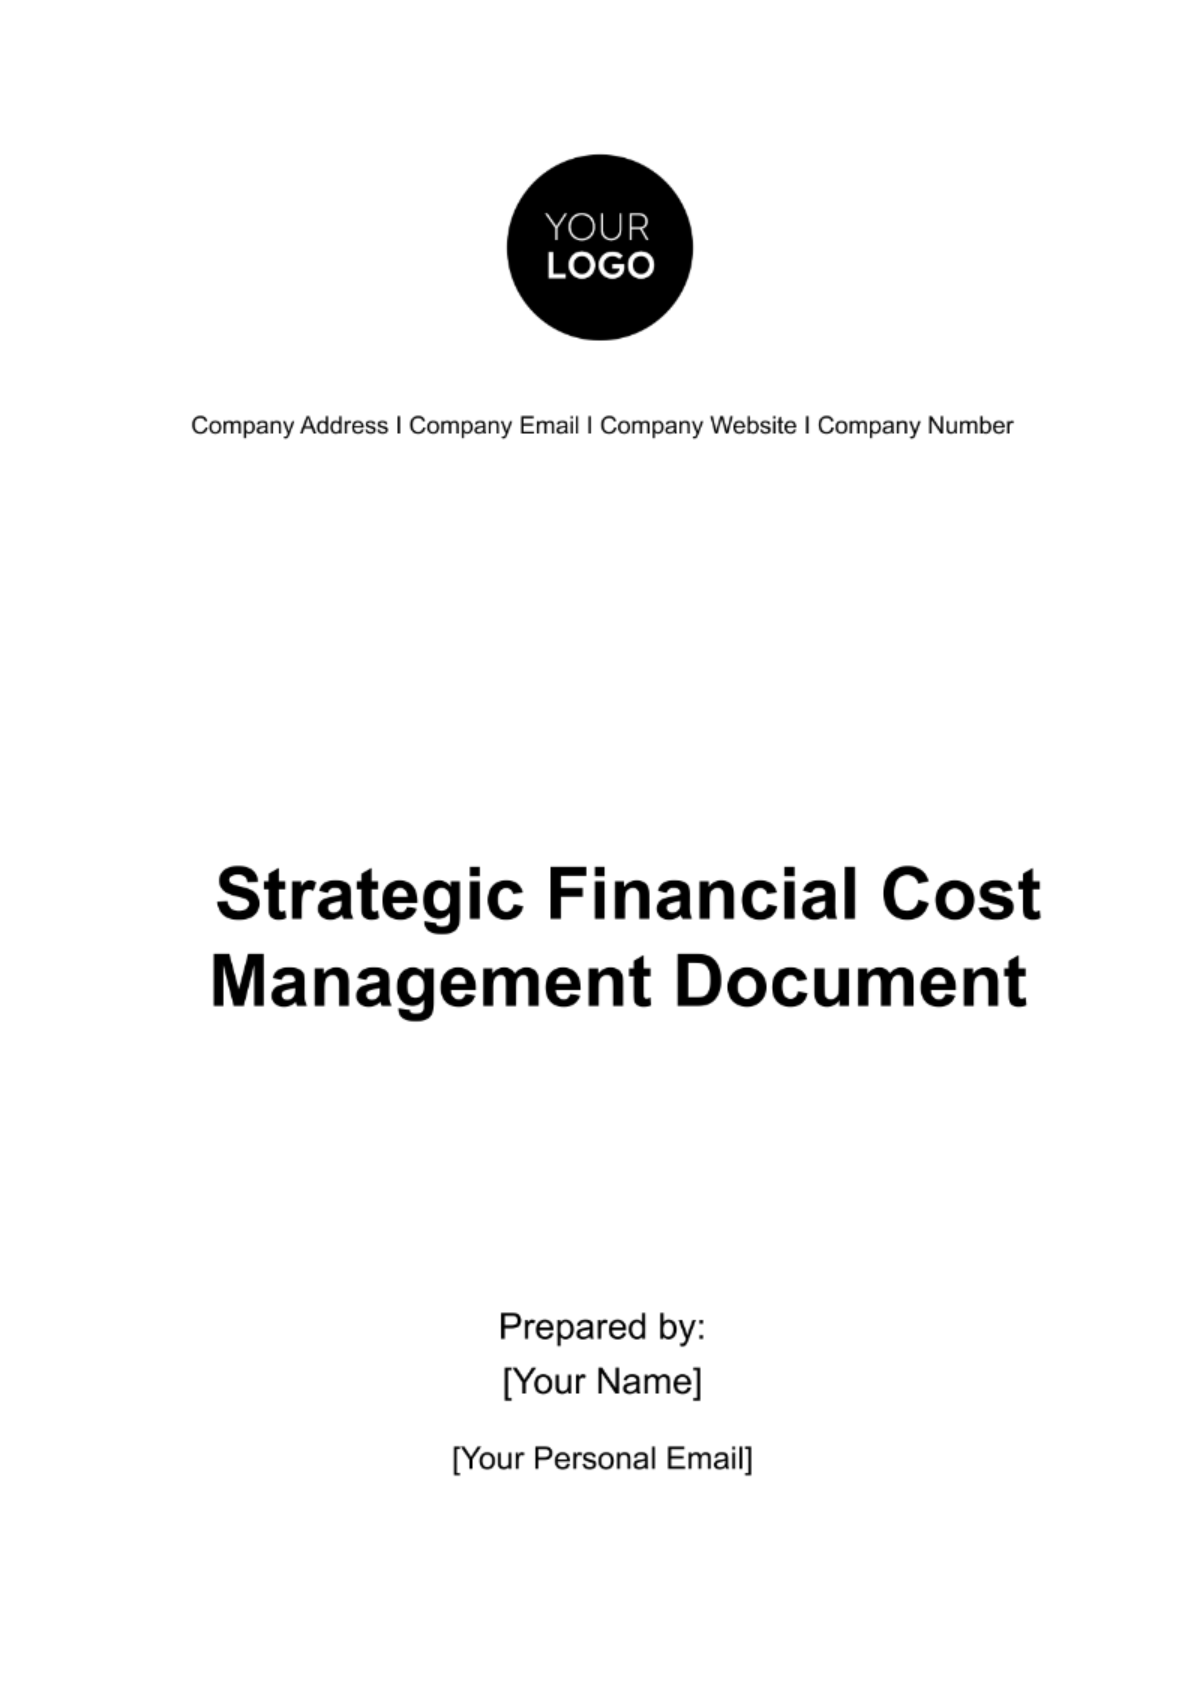 Free Strategic Financial Cost Management Document Template